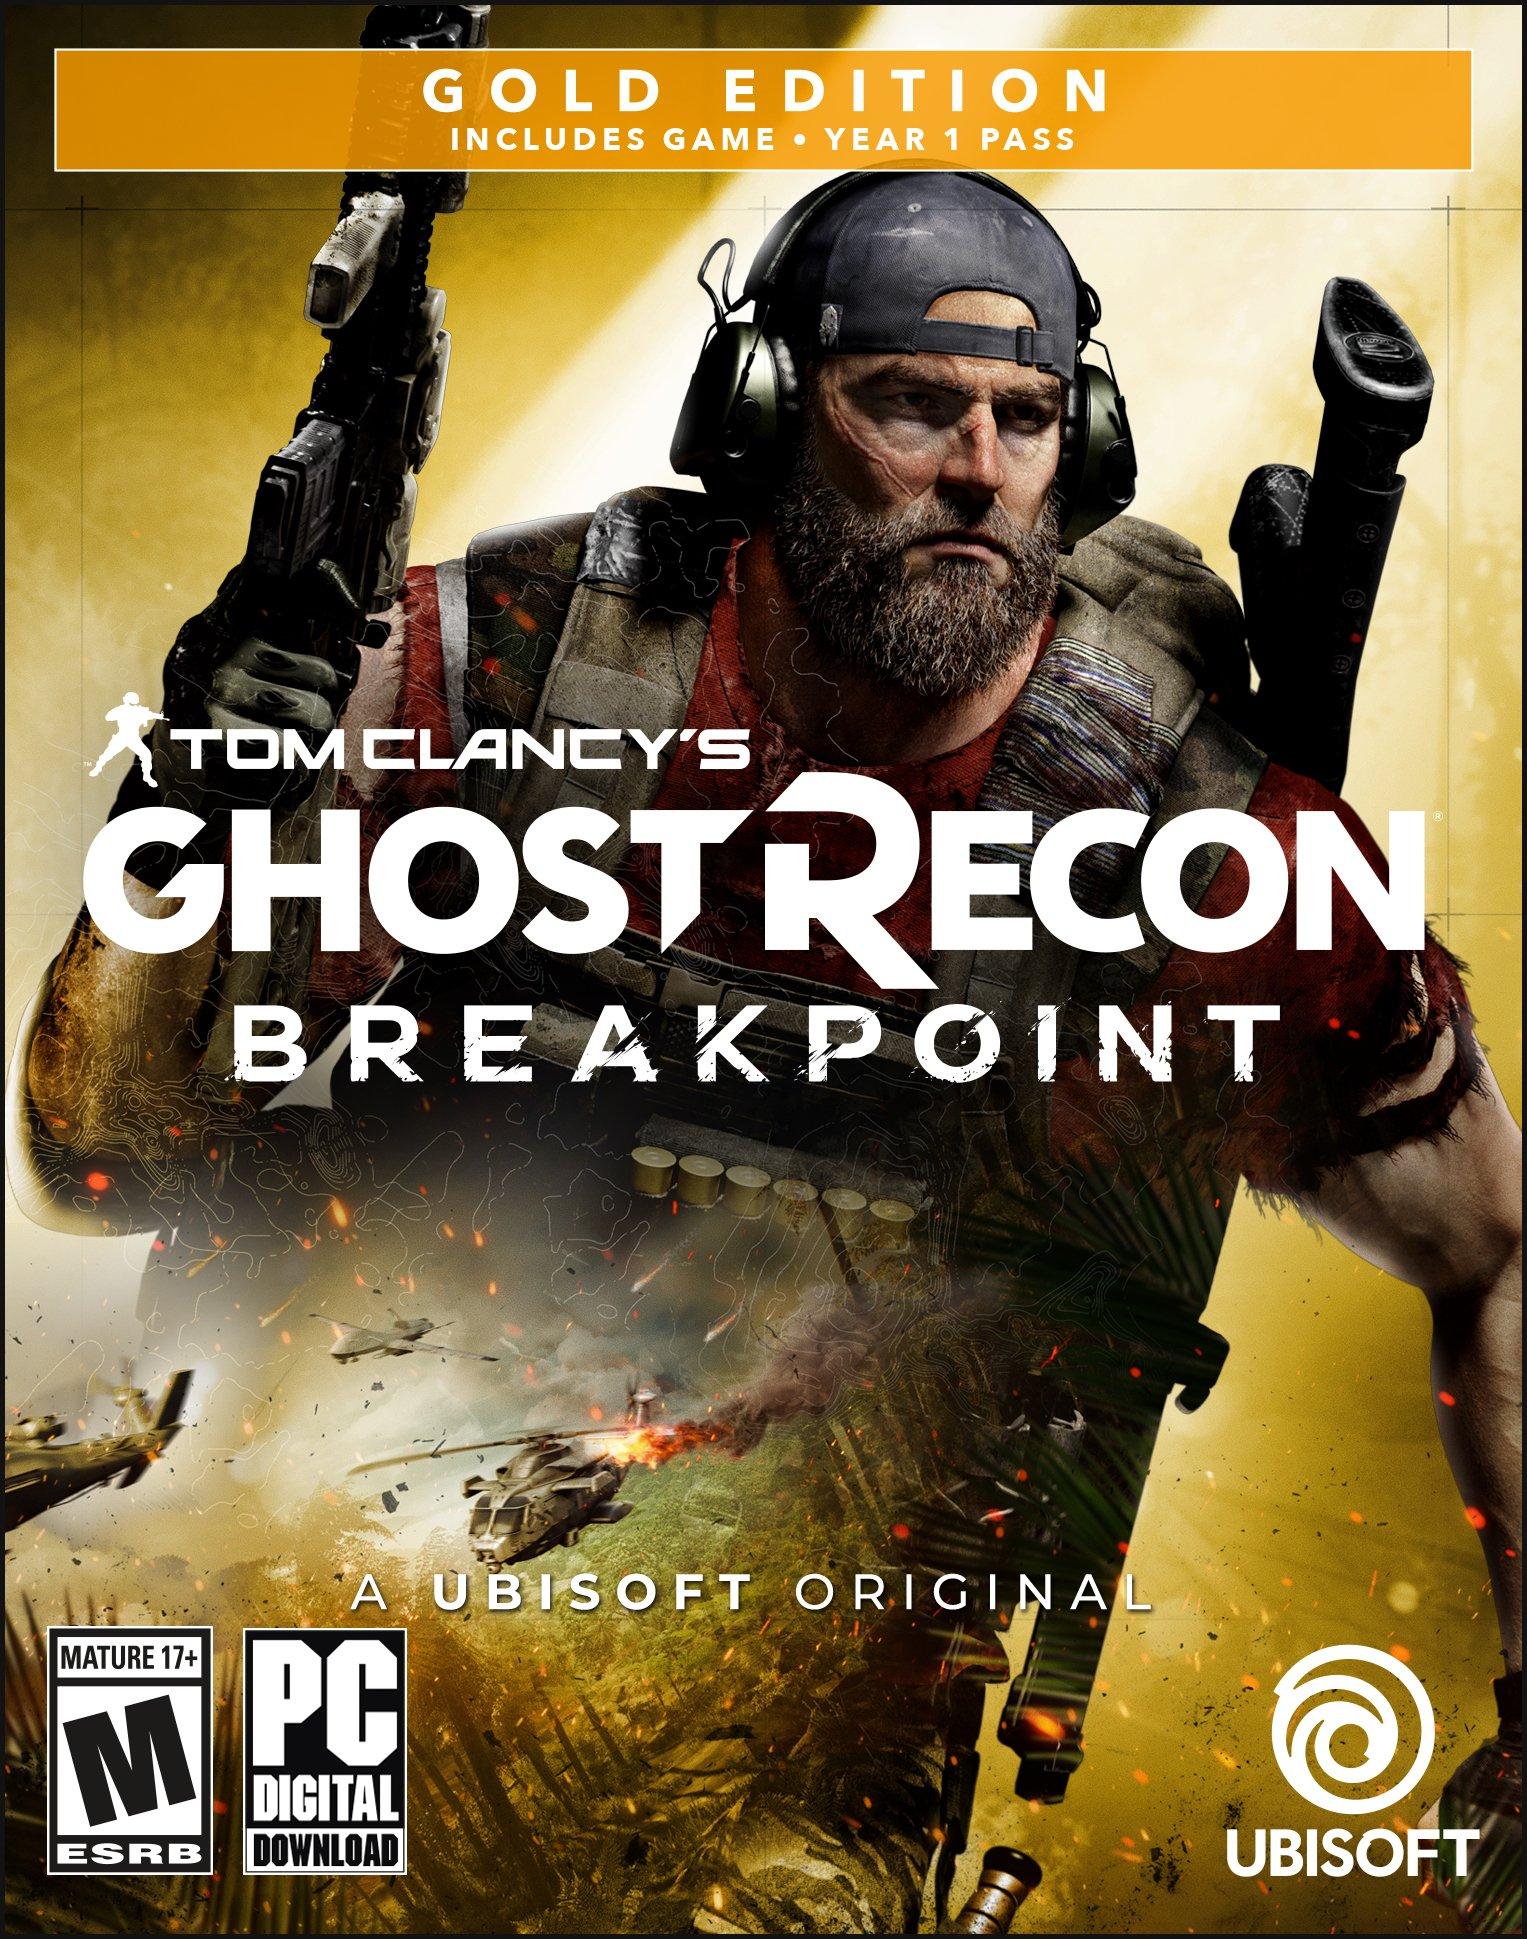 tom clancys ghost recon games in order